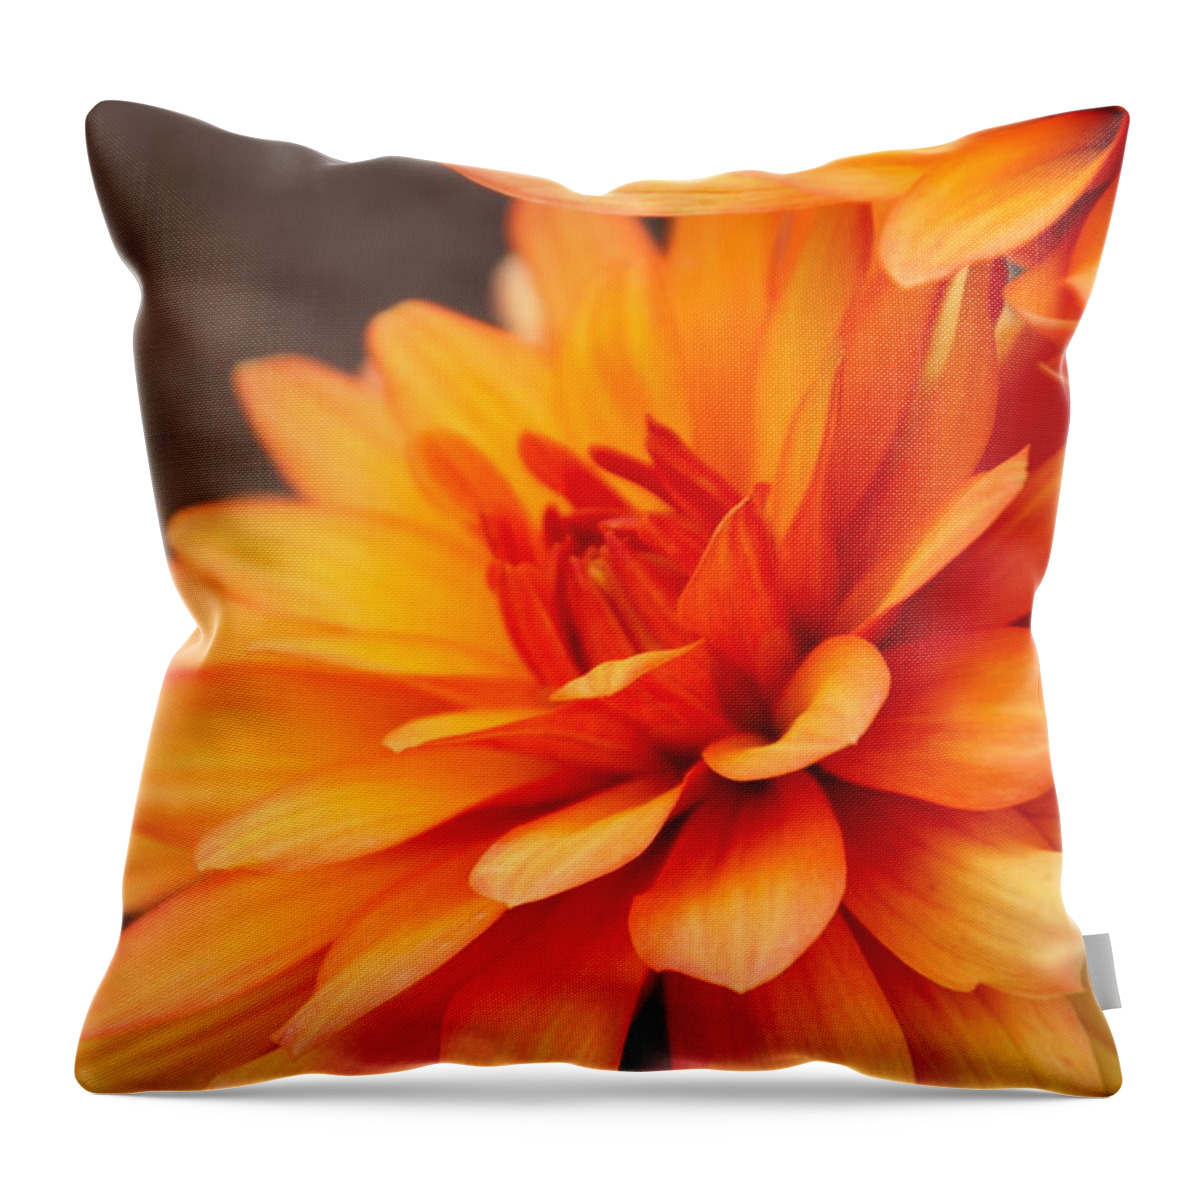 Floral Throw Pillow featuring the photograph Orange Dahlia by Debbie Nobile